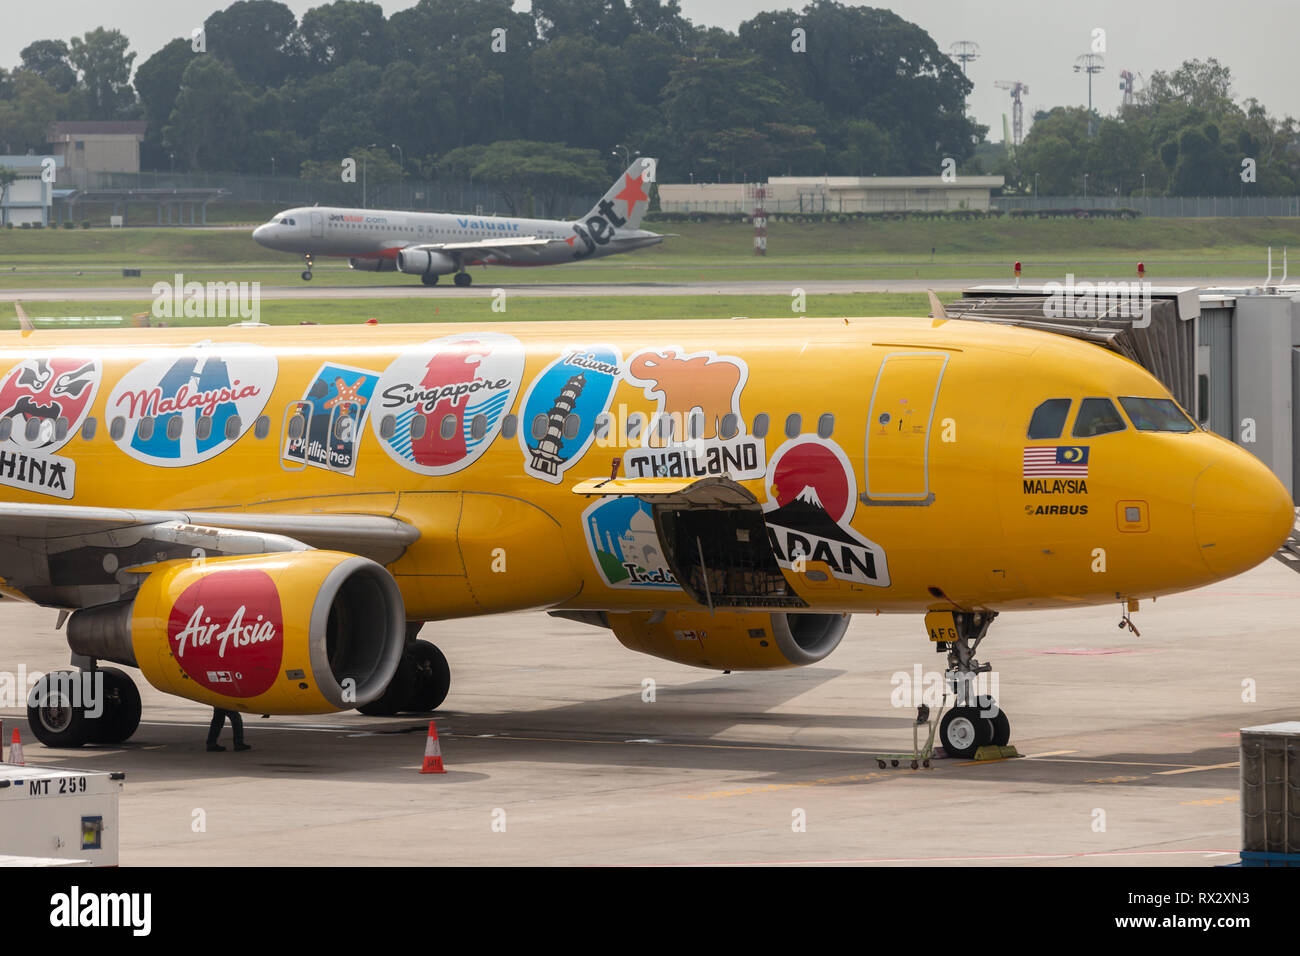 AirAsia Airbus A320-216 airliner in bright yellow livery advertising Expedia travel company at Changi International Airport. Stock Photo